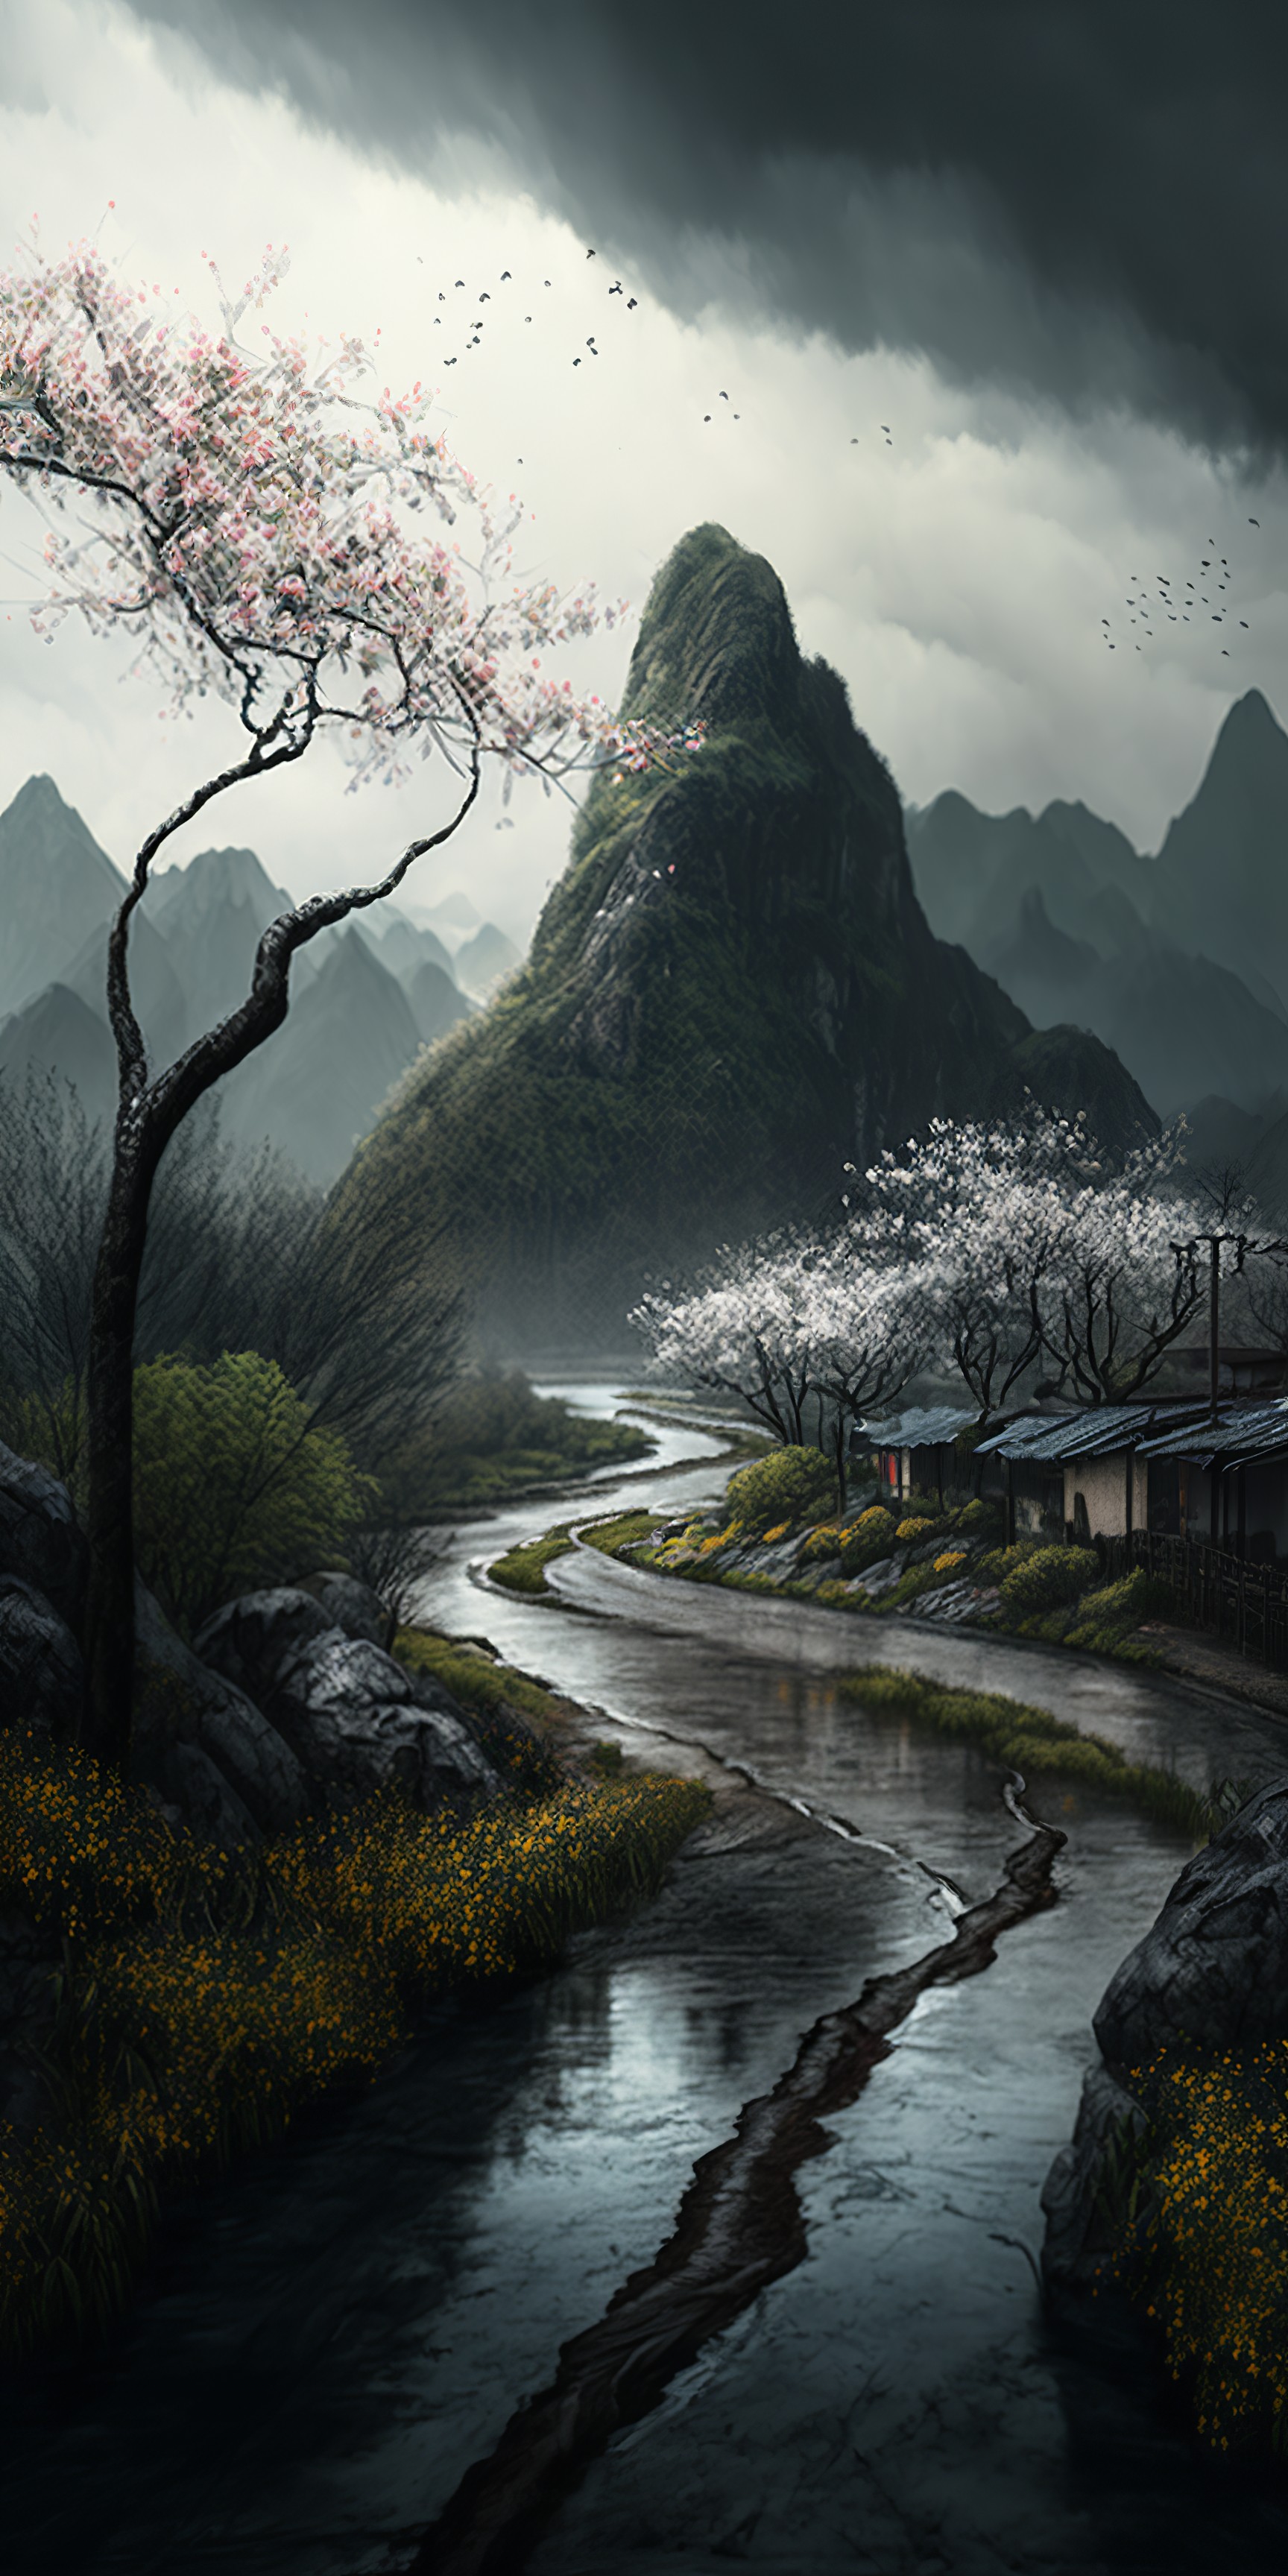 The beauty of China in the spring rain becomes a painting